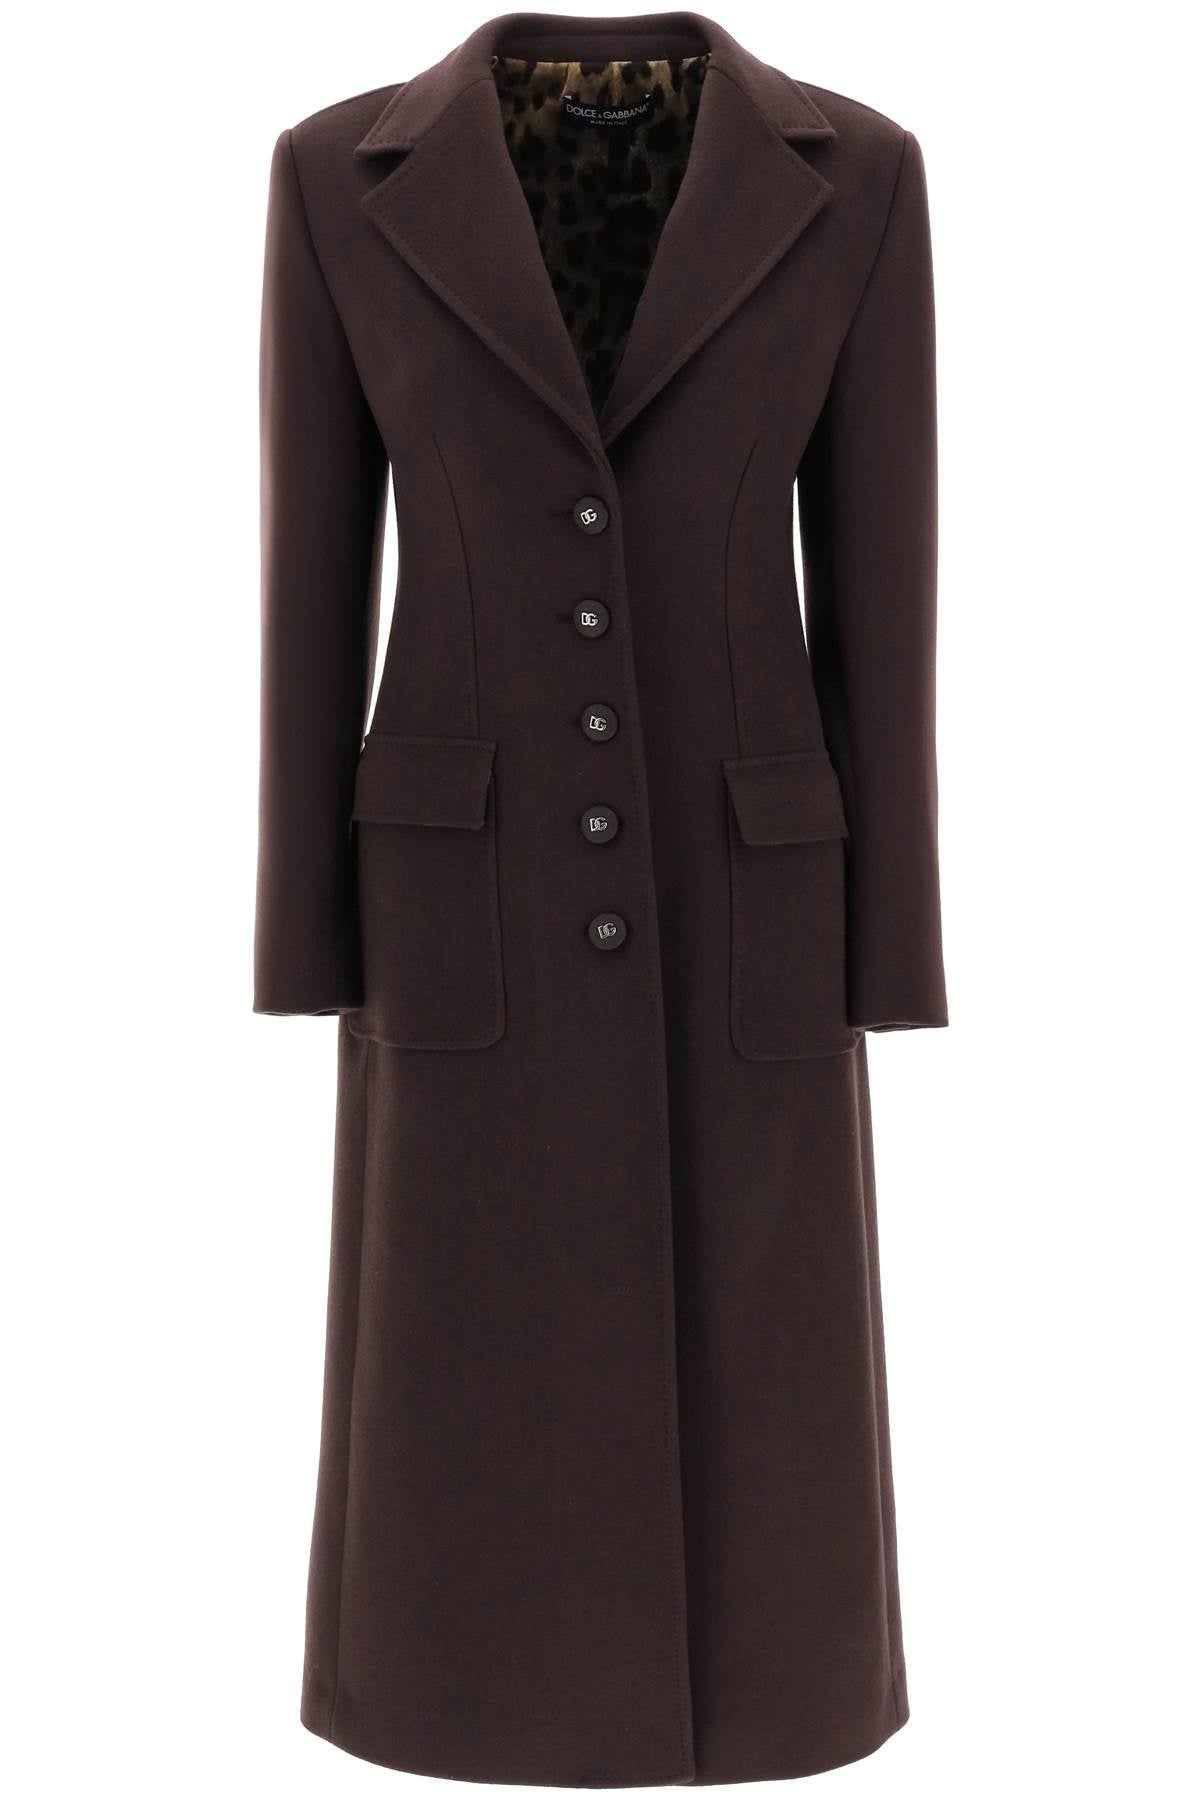 Dolce & gabbana shaped coat in wool and cashmere F0C1WT FU26Y MARRONE SCURO 4